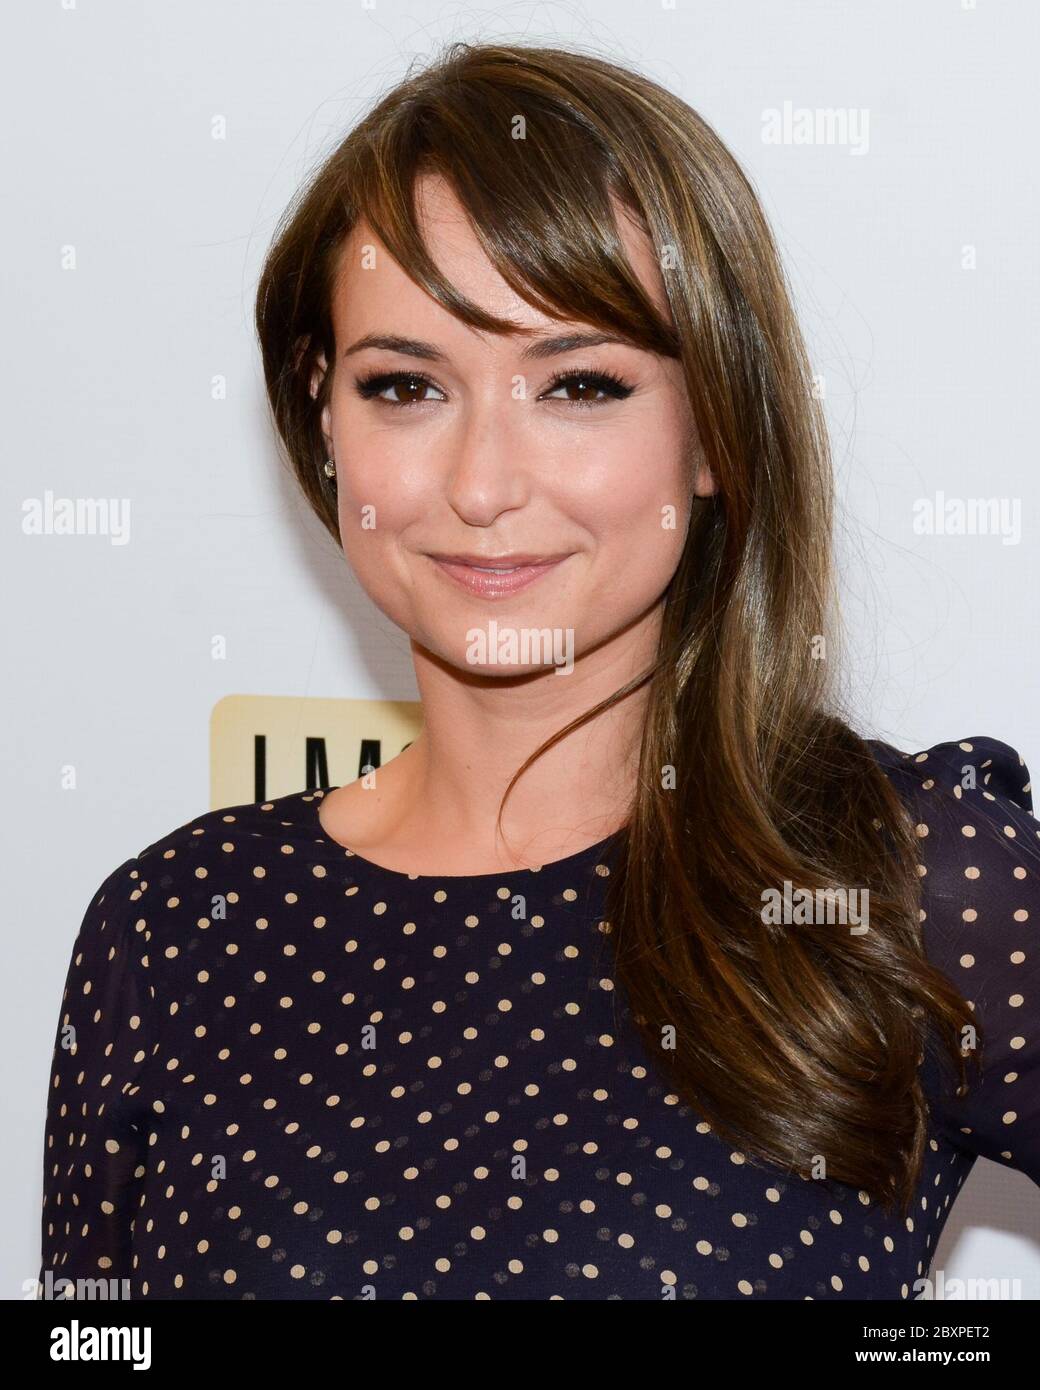 April 23, 2016, Glendale, California, USA: Milana Vayntrub attends the 3rd annual Location Managers Guild International Awards at The Alex Theatre. (Credit Image: © Billy Bennight/ZUMA Wire) Stock Photo